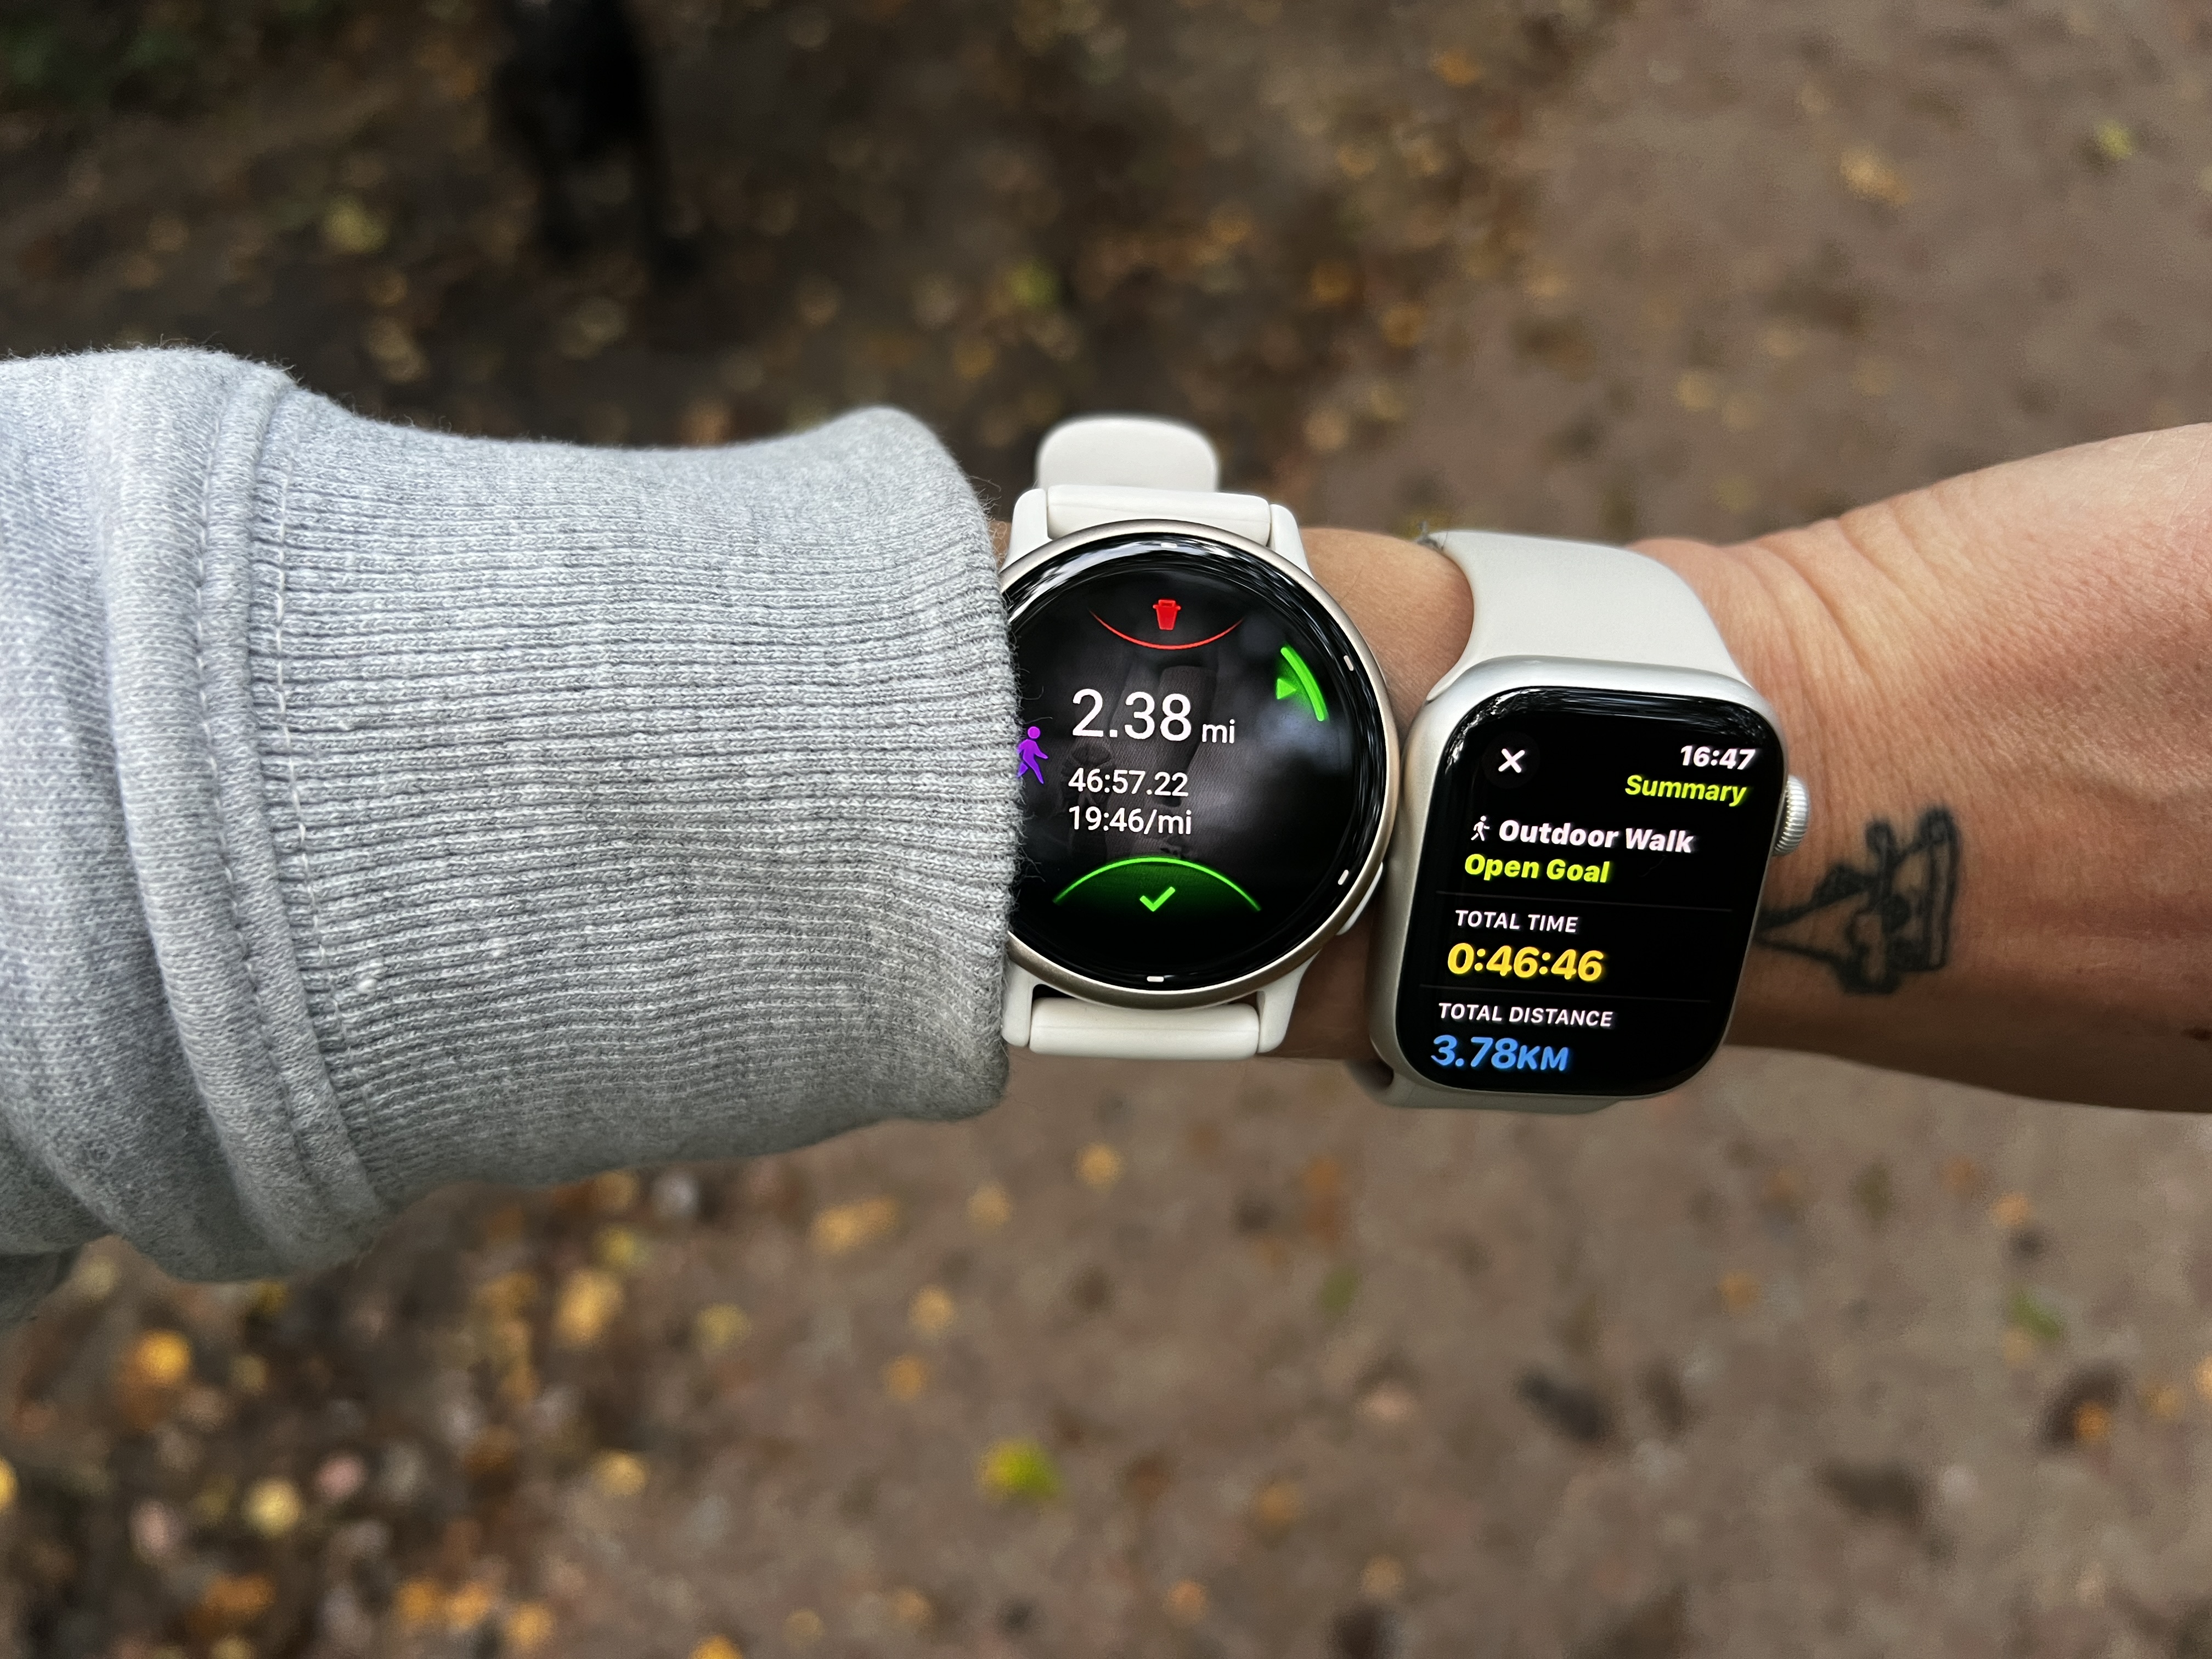 Garmin Vivoactive 5 In-Depth Review: 19 New Features to Know! 